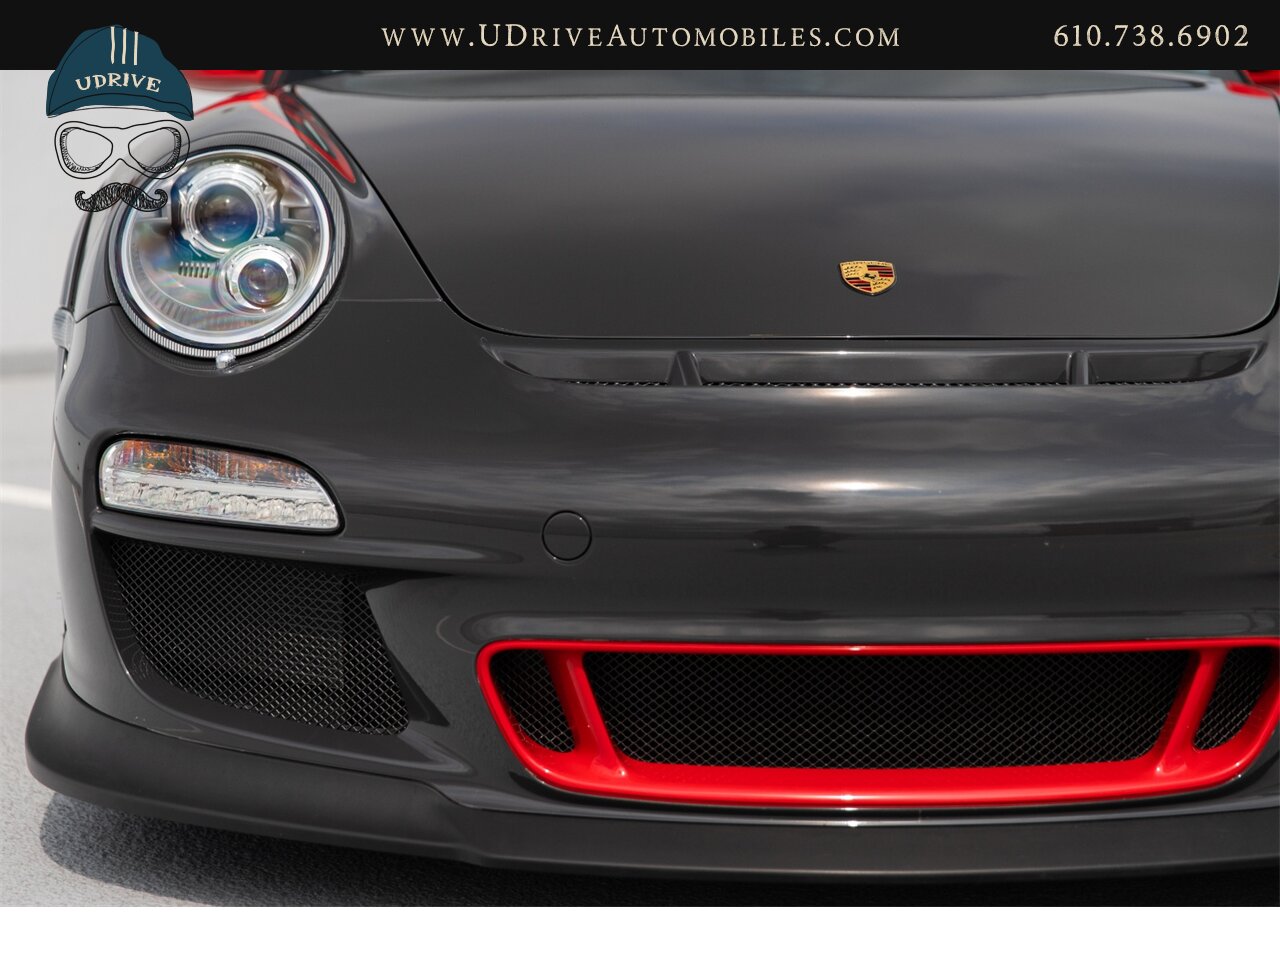 2010 Porsche 911 GT3 RS 1k Miles Dev Red Stitching Throughout  Front Axle Lift Sport Chrono 997.2 - Photo 17 - West Chester, PA 19382